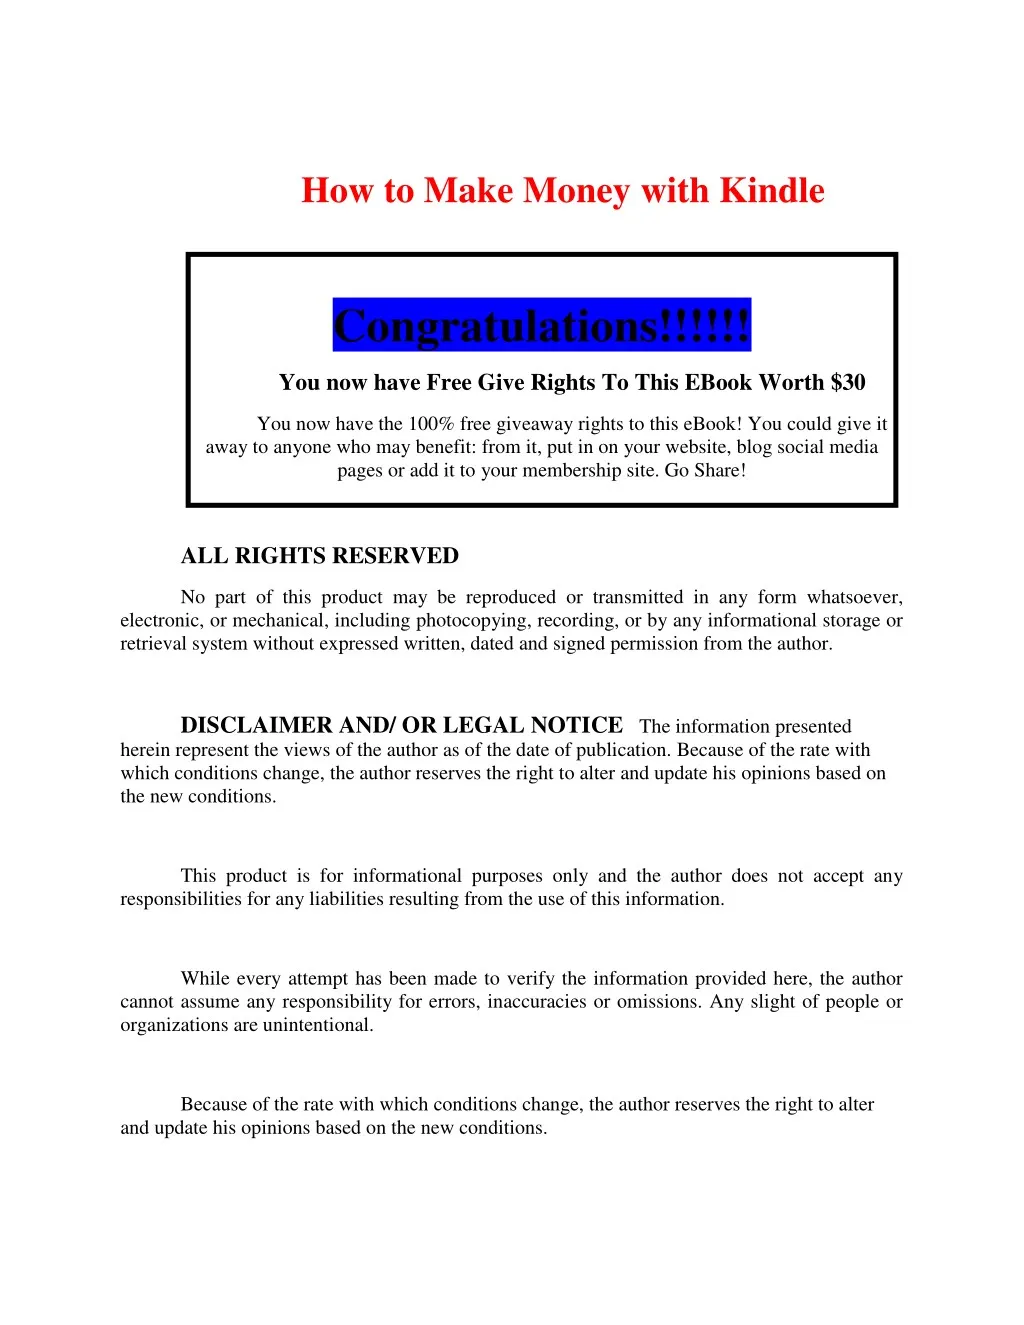 how to make money with kindle congratulations